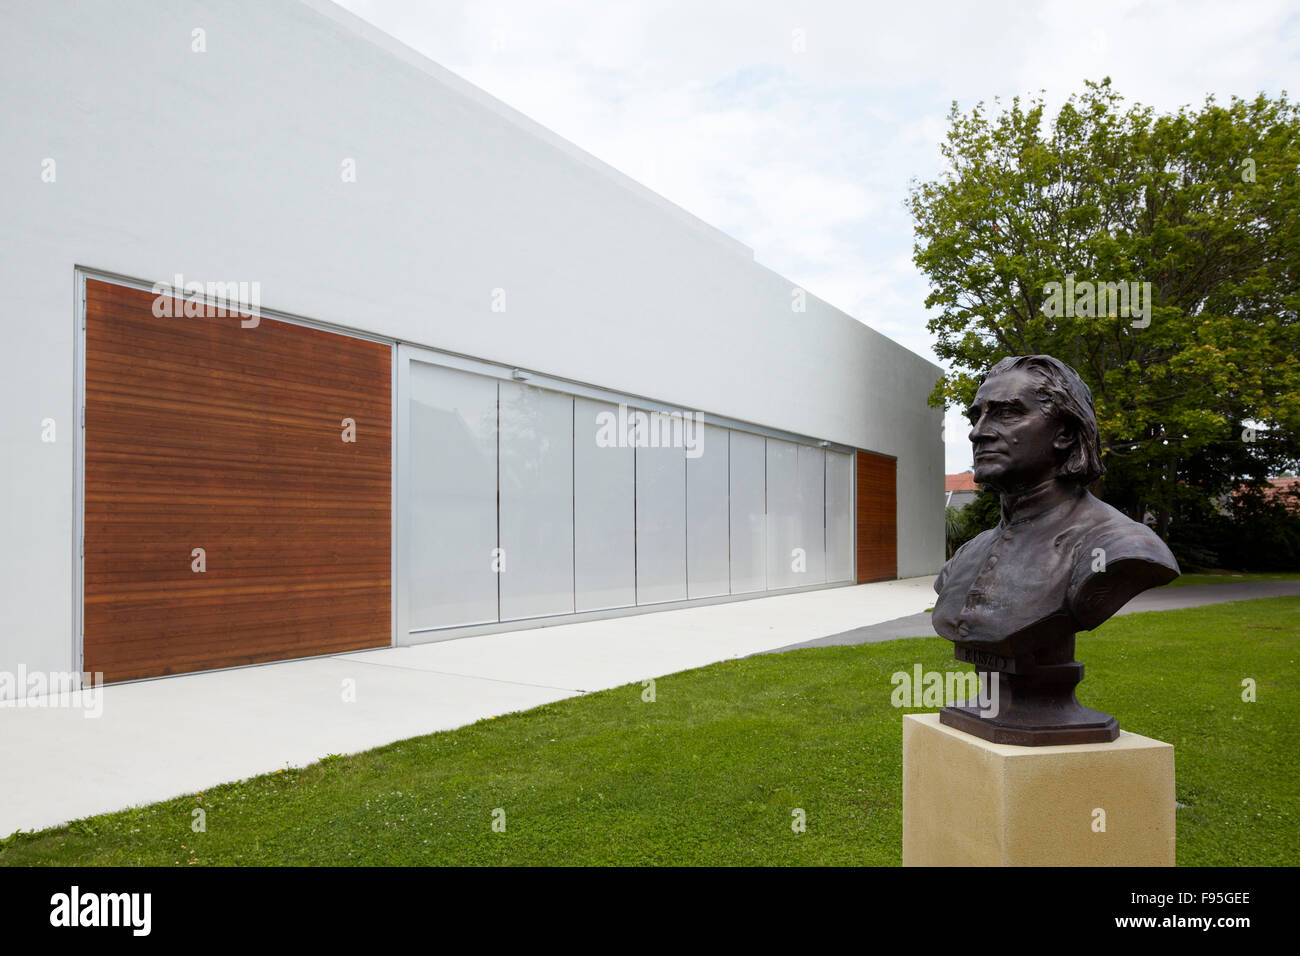 Franz Liszt Konzerthalle, Raiding, Burgenland, Austria. View of the exterior to the Franz Liszt Konzerthalle, concert hall, and a bust of a male head on the grounds. Stock Photo